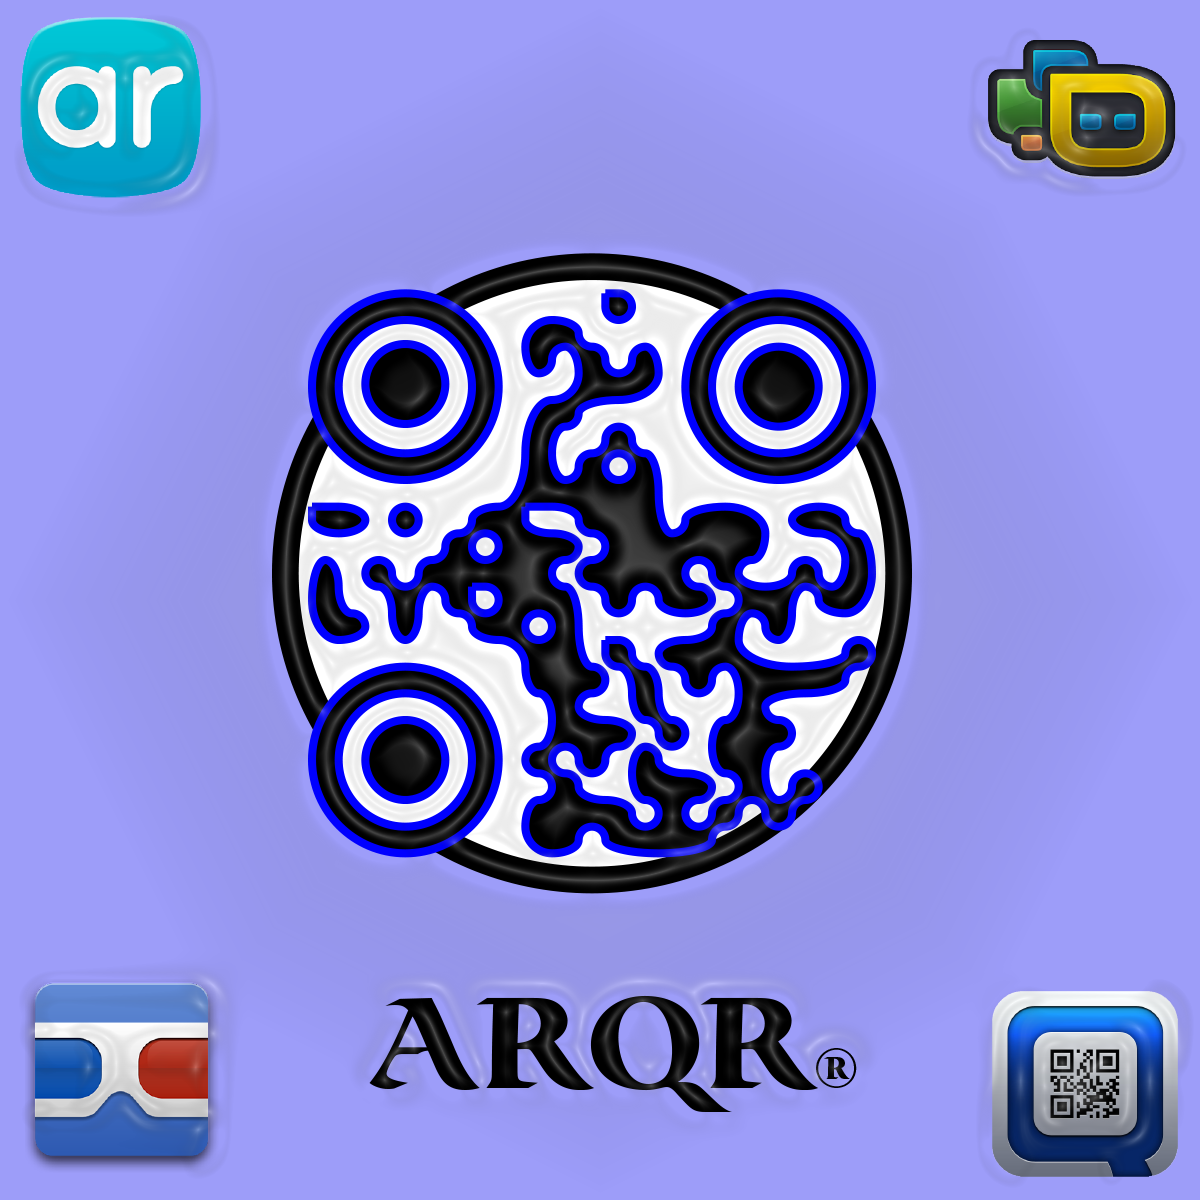 ARQR Code for the YouTube video Ibiza by Mike Posner